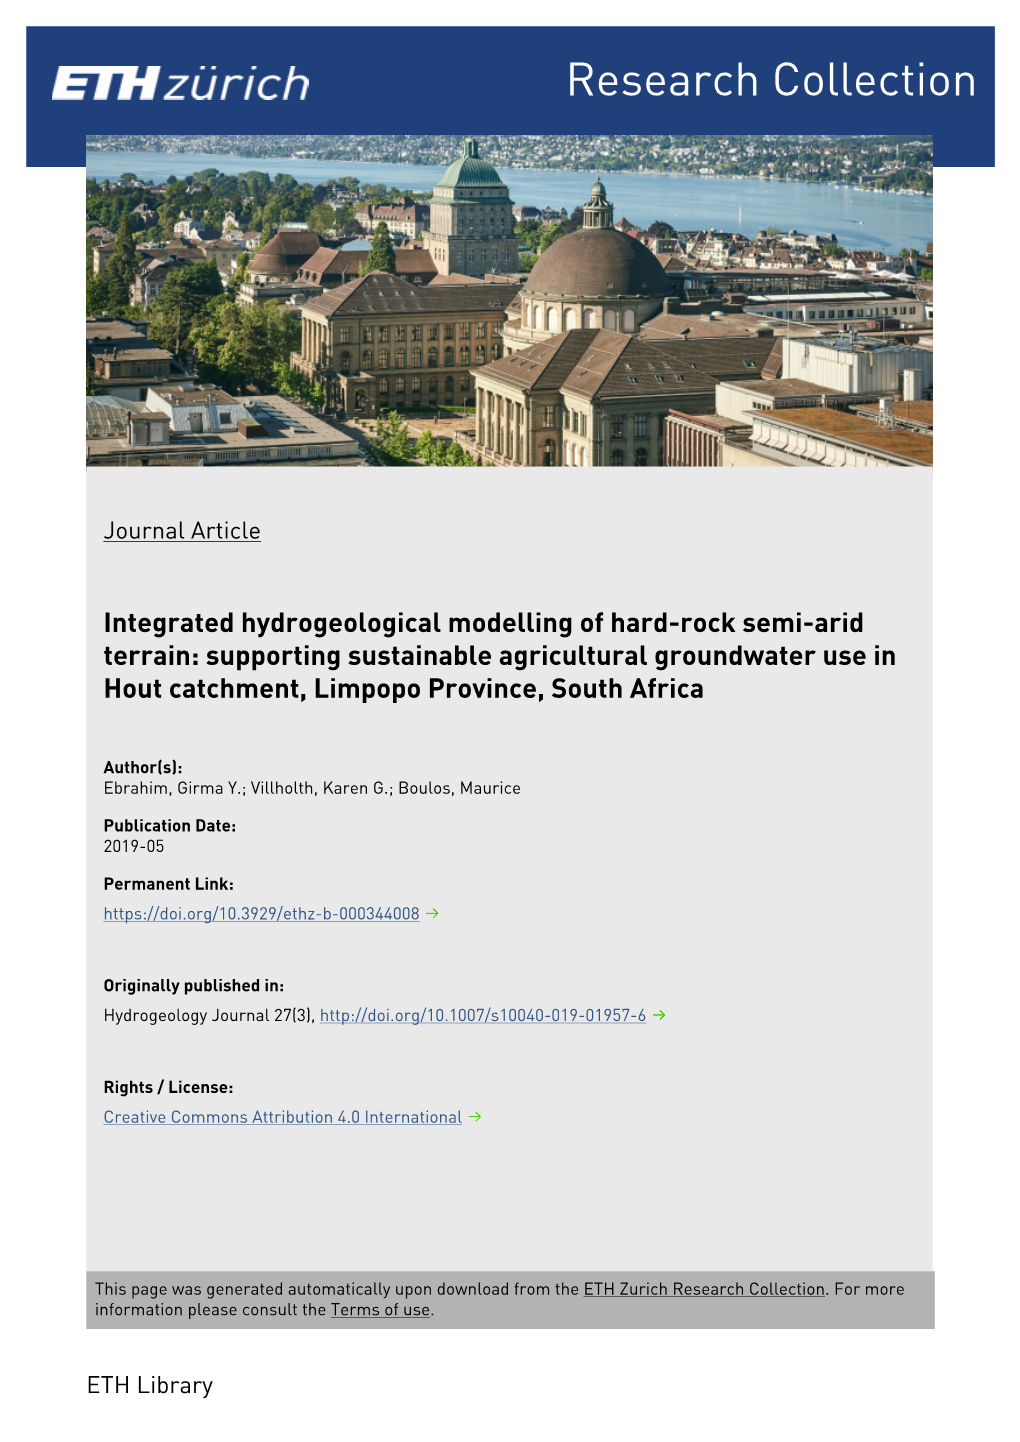 Integrated Hydrogeological Modelling of Hard-Rock